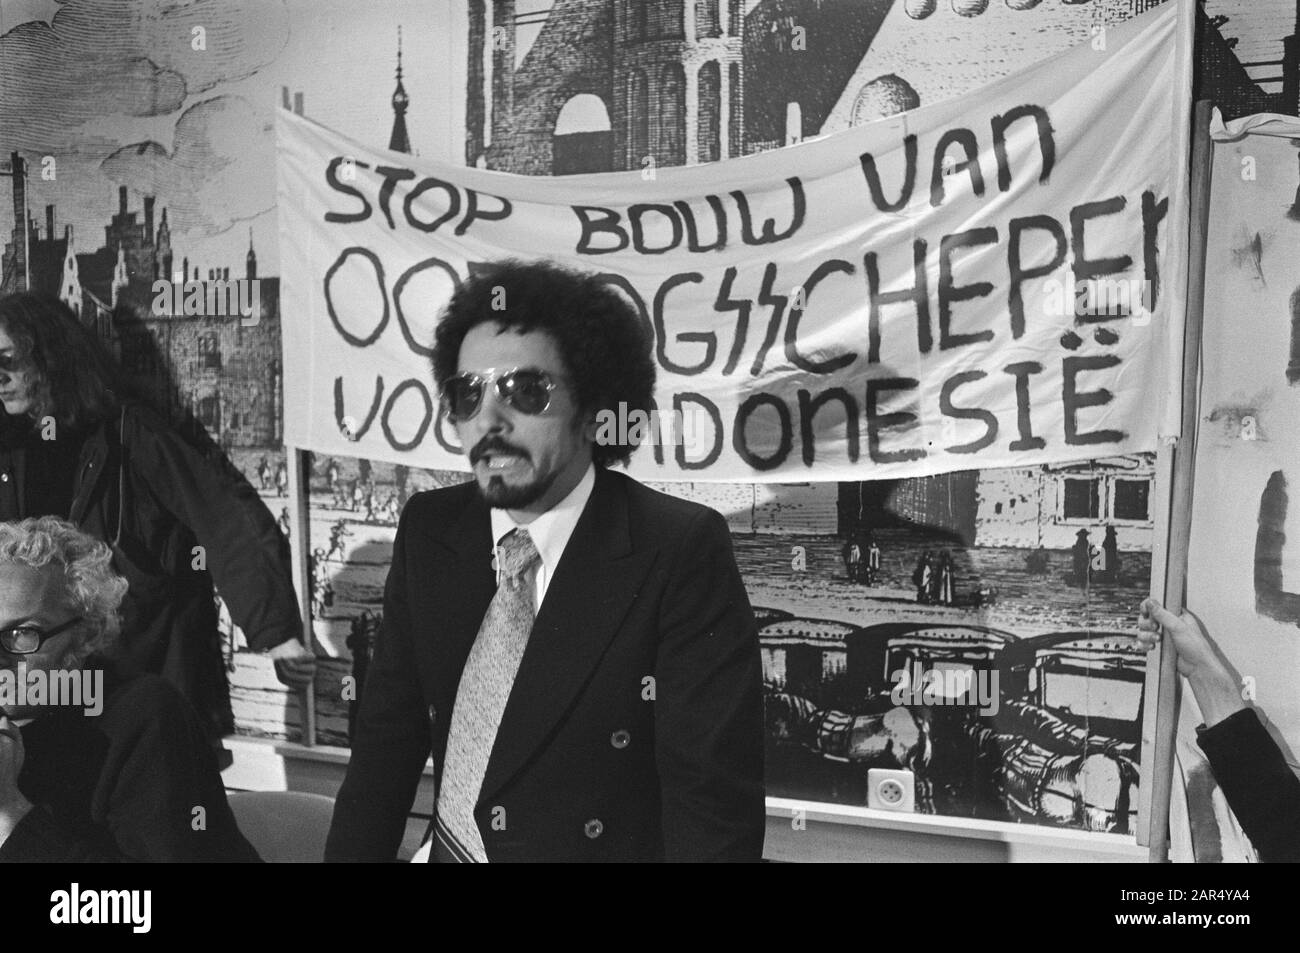 Chamber questions on the construction of corvettes for Indonesia  Fretilin foreman Ramos-Horta between the banners Date: March 3, 1977 Location: The Hague, South-Holland Keywords: Fretilin, liberation movements, demonstrations Personal name: Ramos-Horta, José Manuel Stock Photo